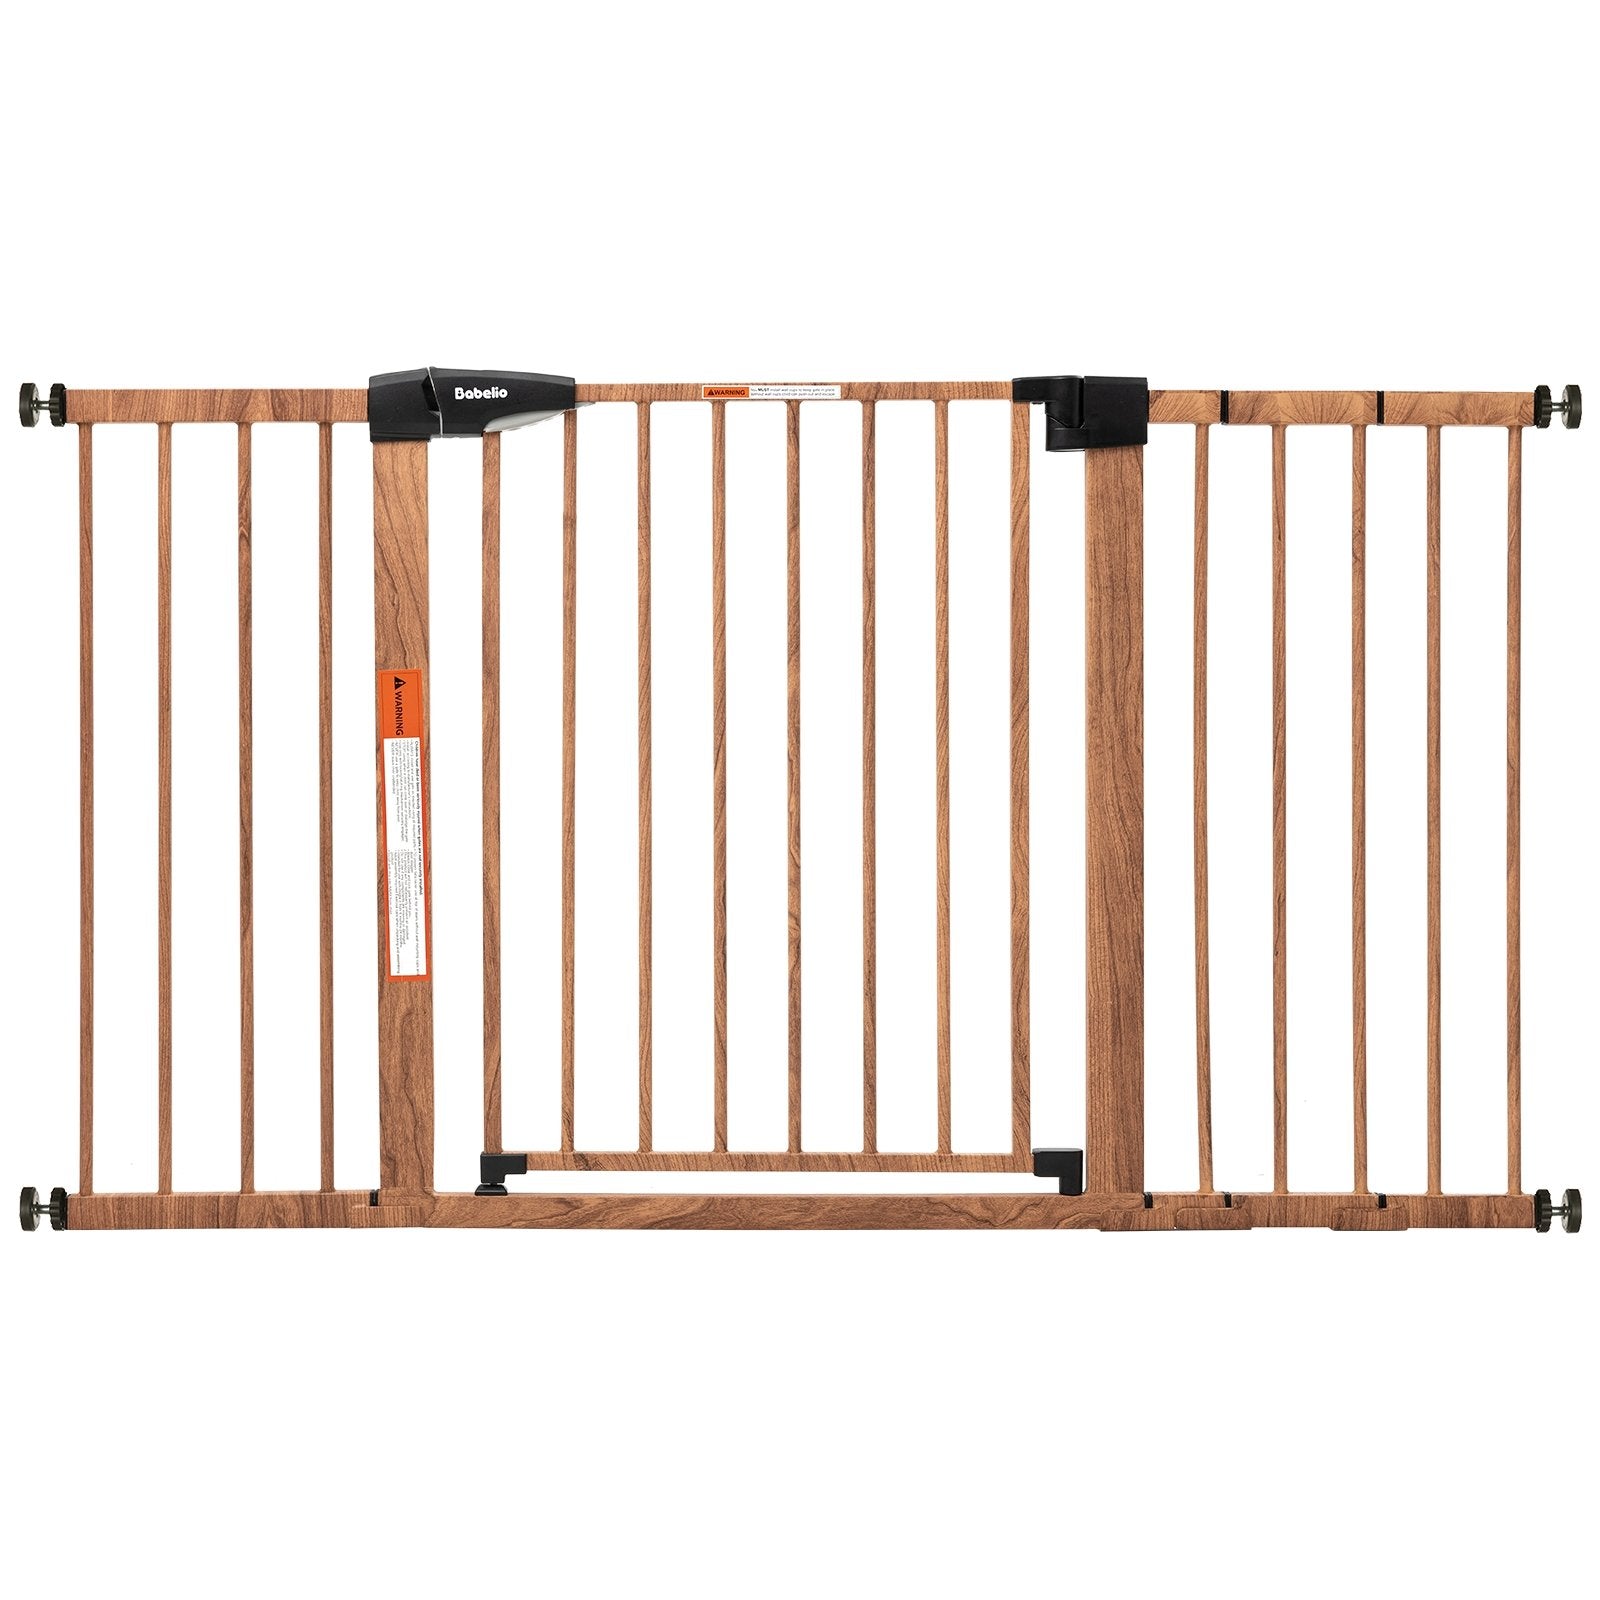 Babelio Metal Baby Gate with Wood Pattern, Easy Install Pressure Mounted Dog Gate, No Drilling, No Tools Required - babeliobaby